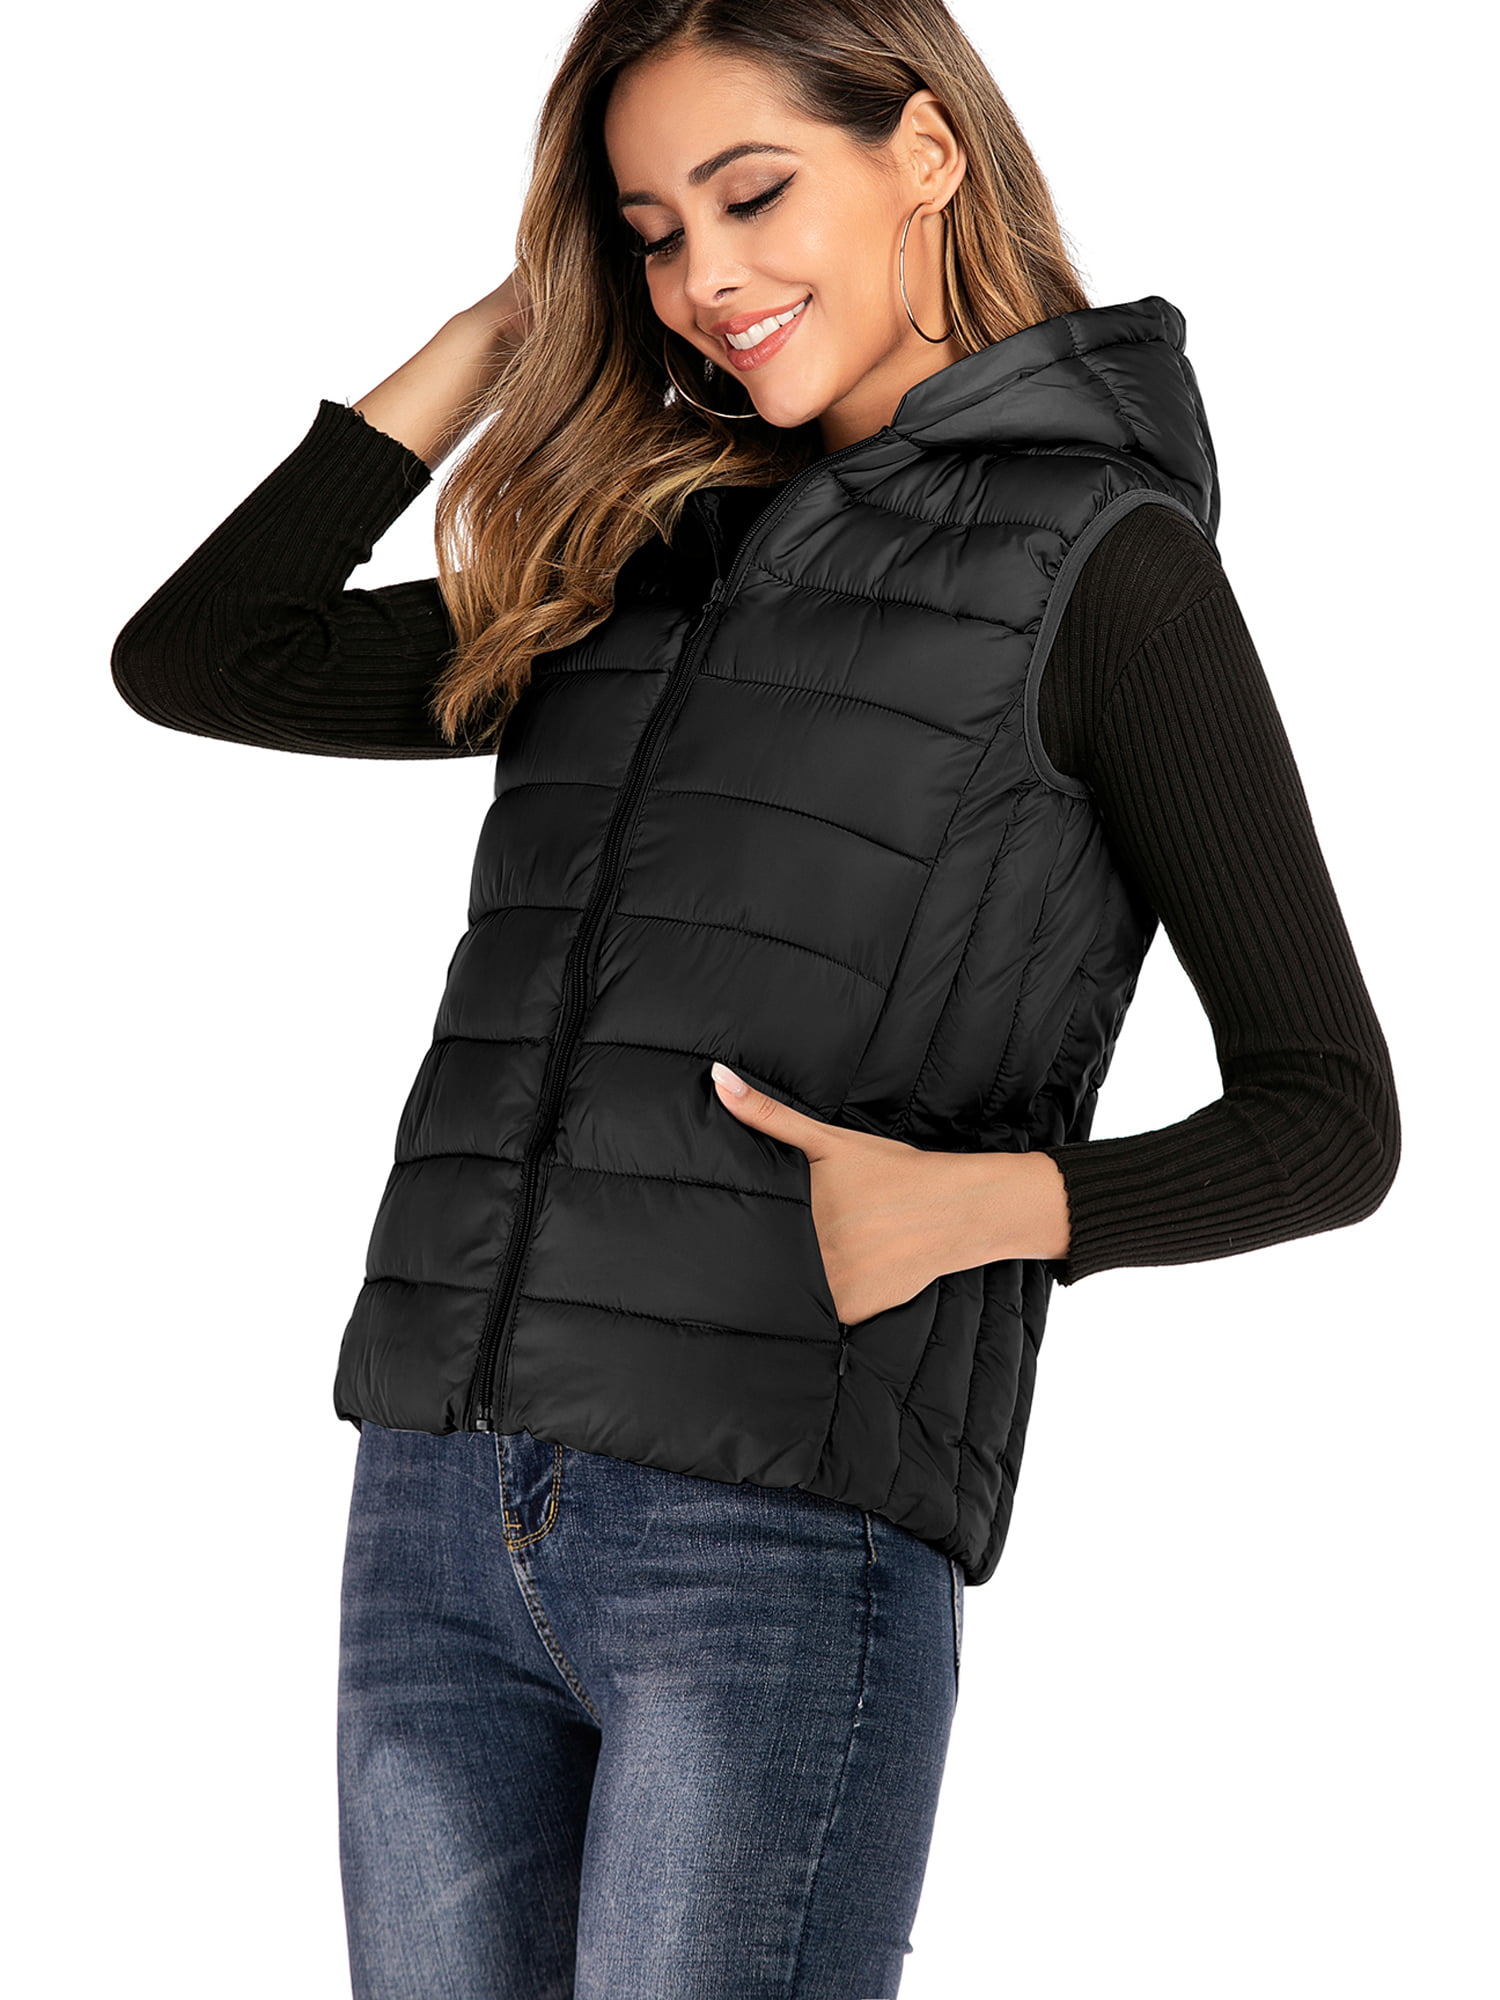 Ladies Riding Vest Jacket Gillet Stylish Outdoor Tailored Fitted Comfort Soft 